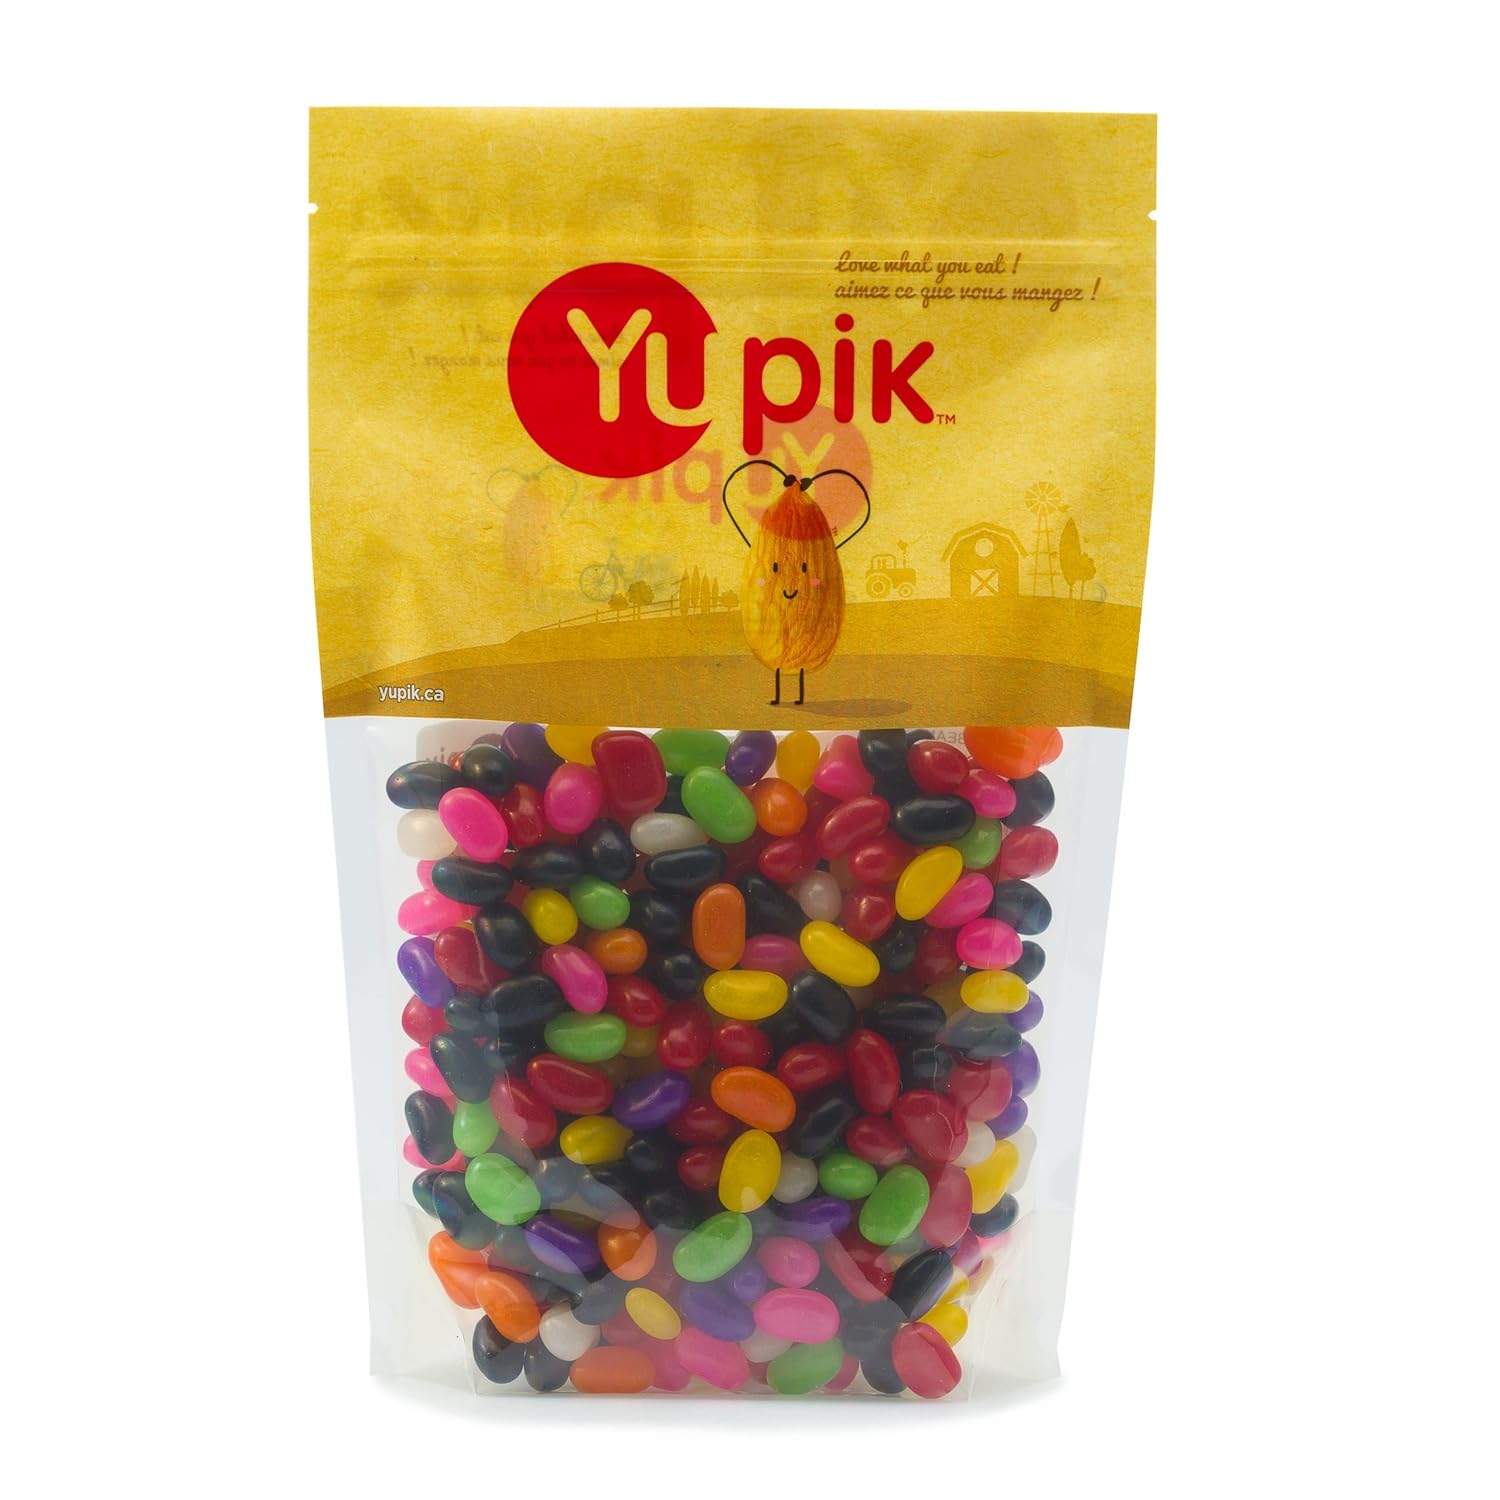 Yupik Jelly Beans, 2.2 lb, Classic Candy, Pack of 1